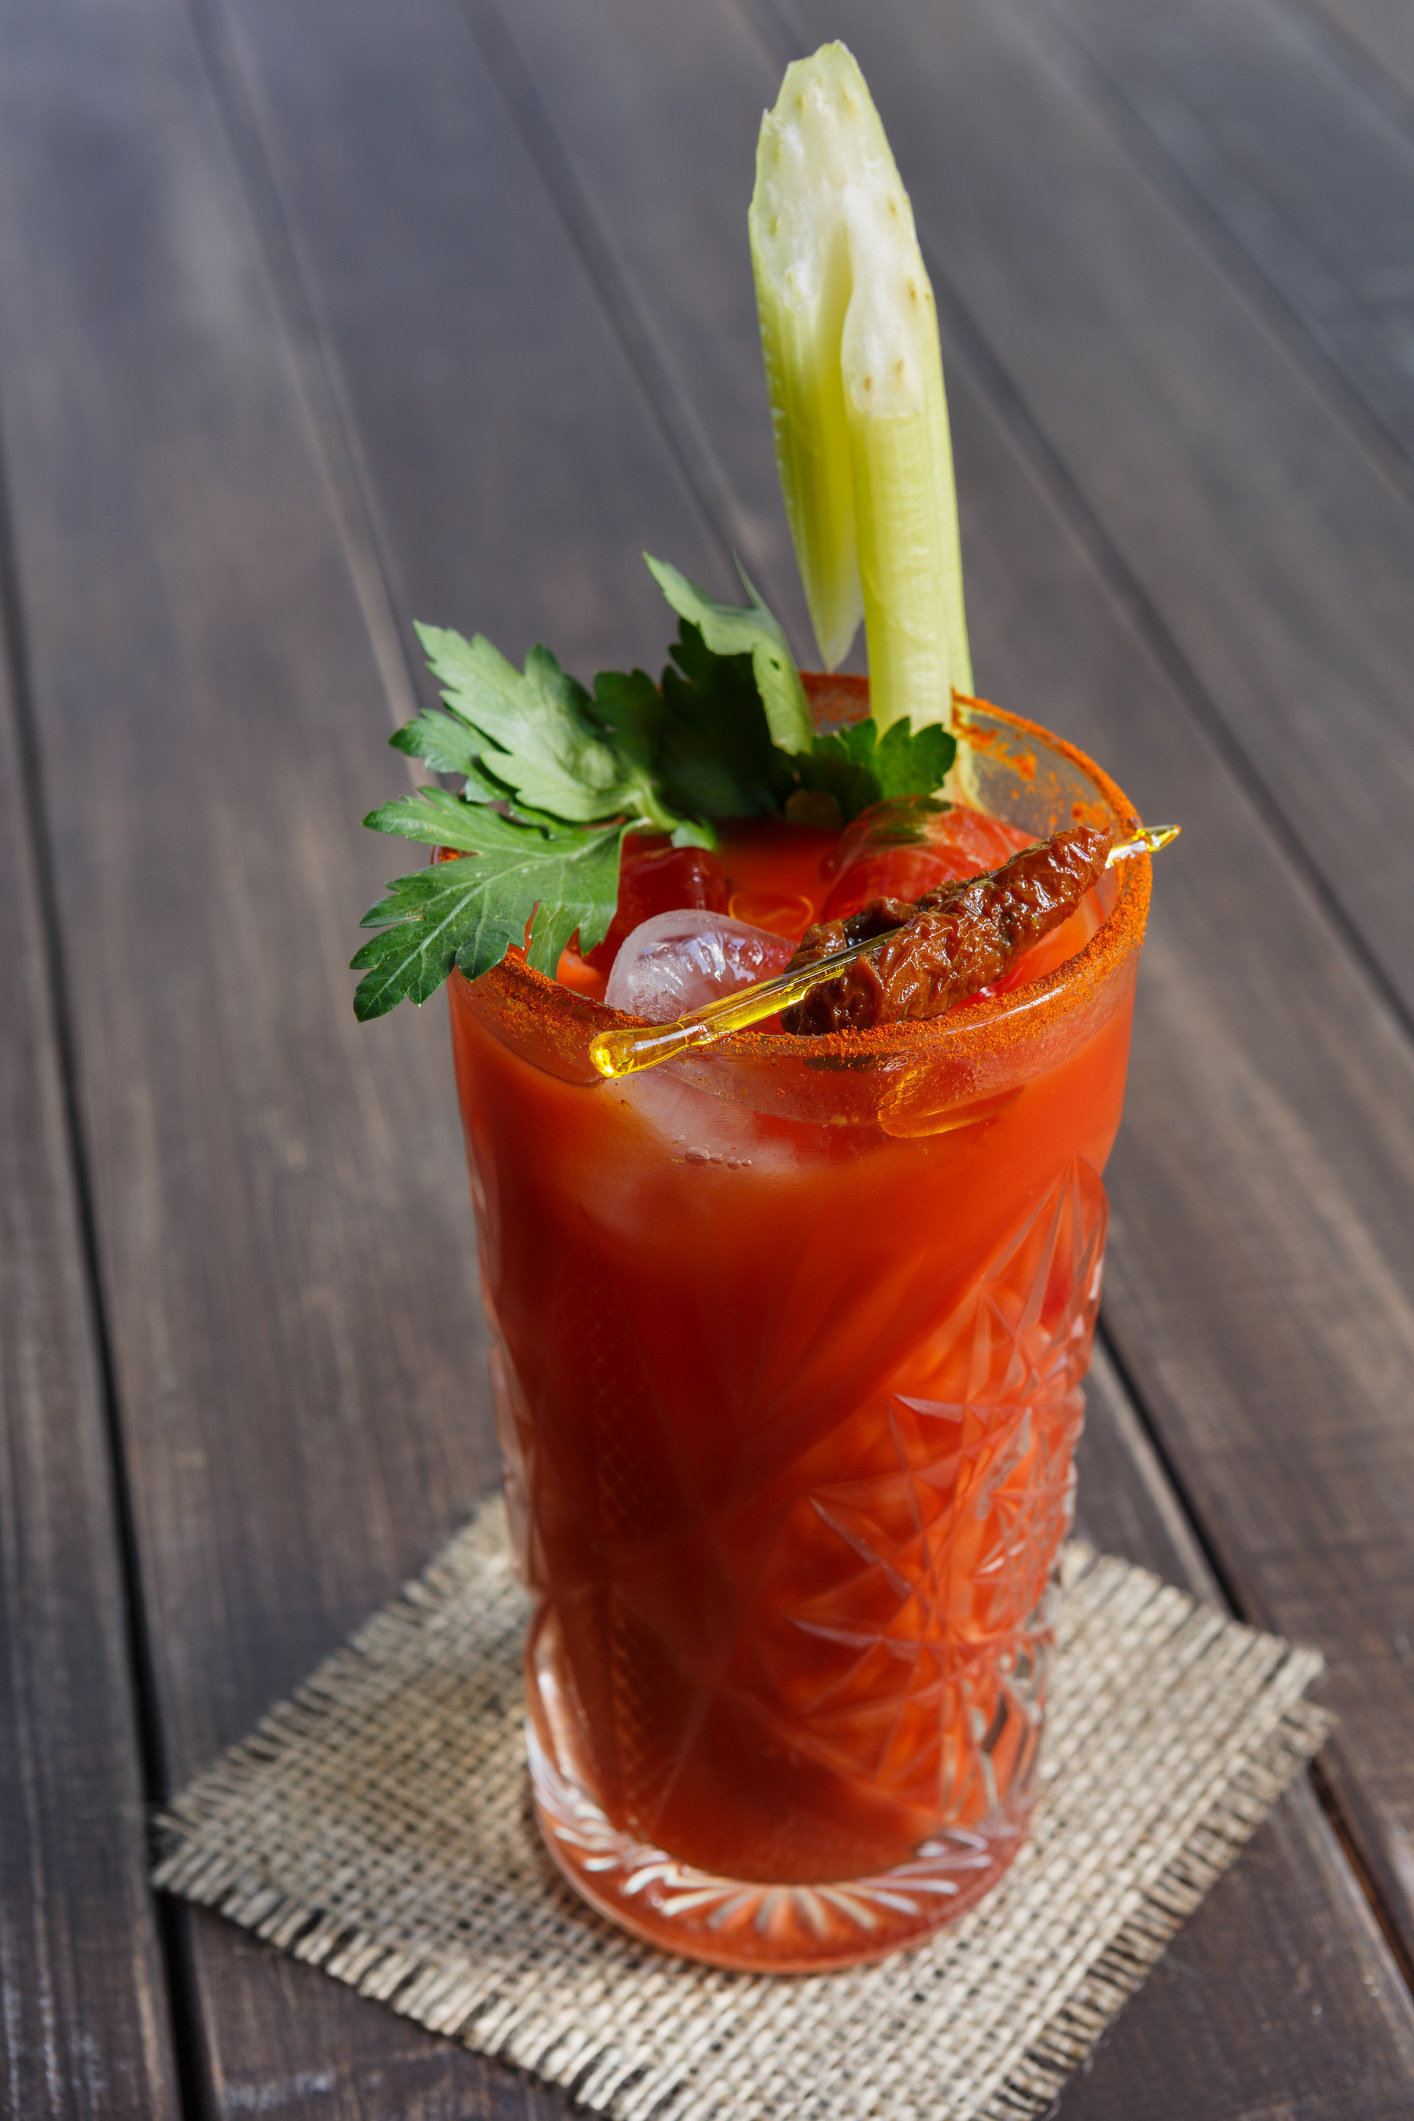 A glass of bloody mary with garnishes and a pepper